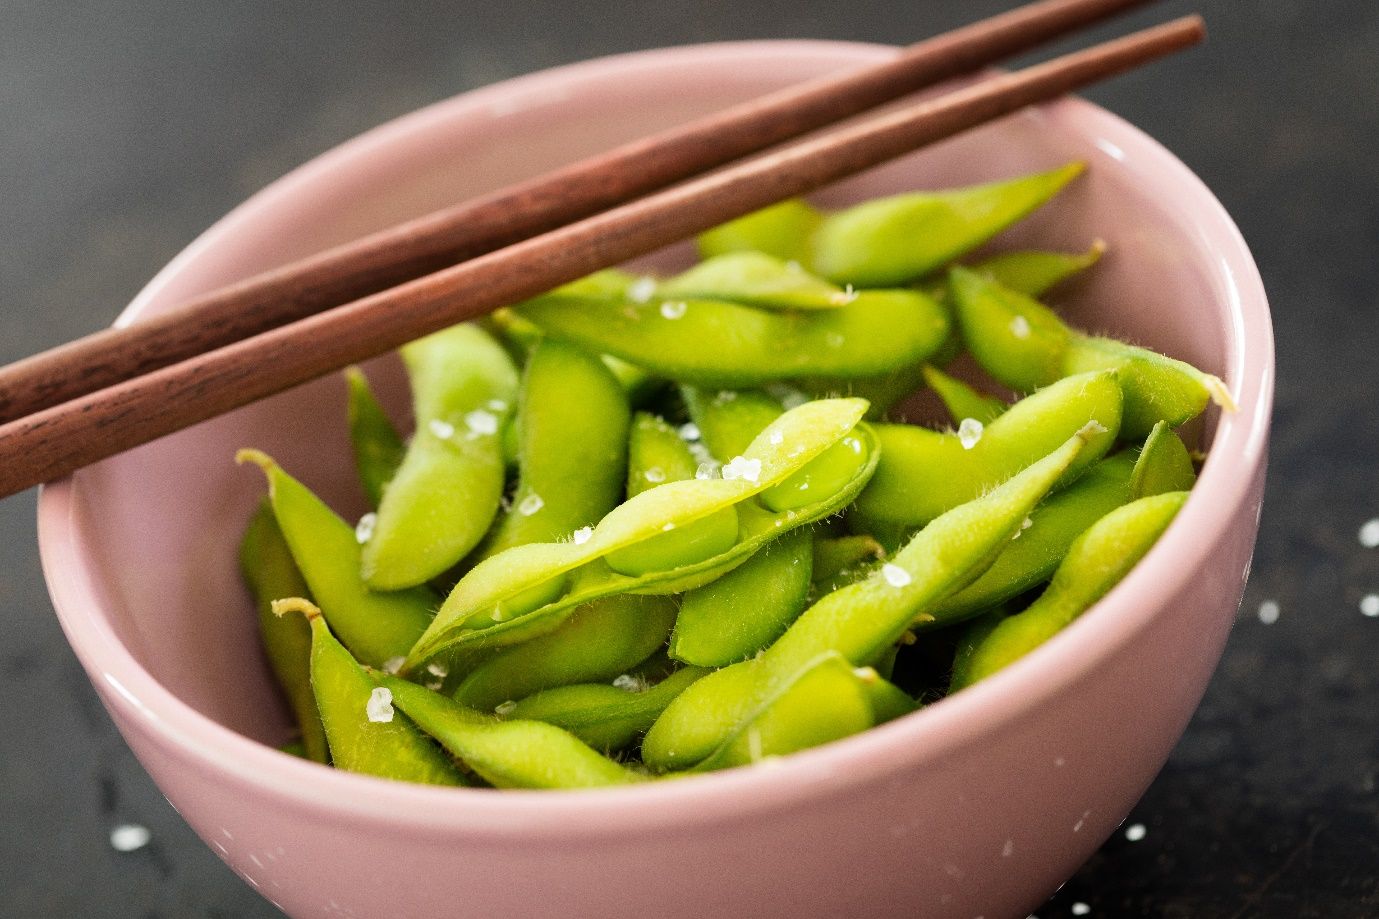 Image shows a bowl of immature soybeans, known as 'edamame' in Japanese.